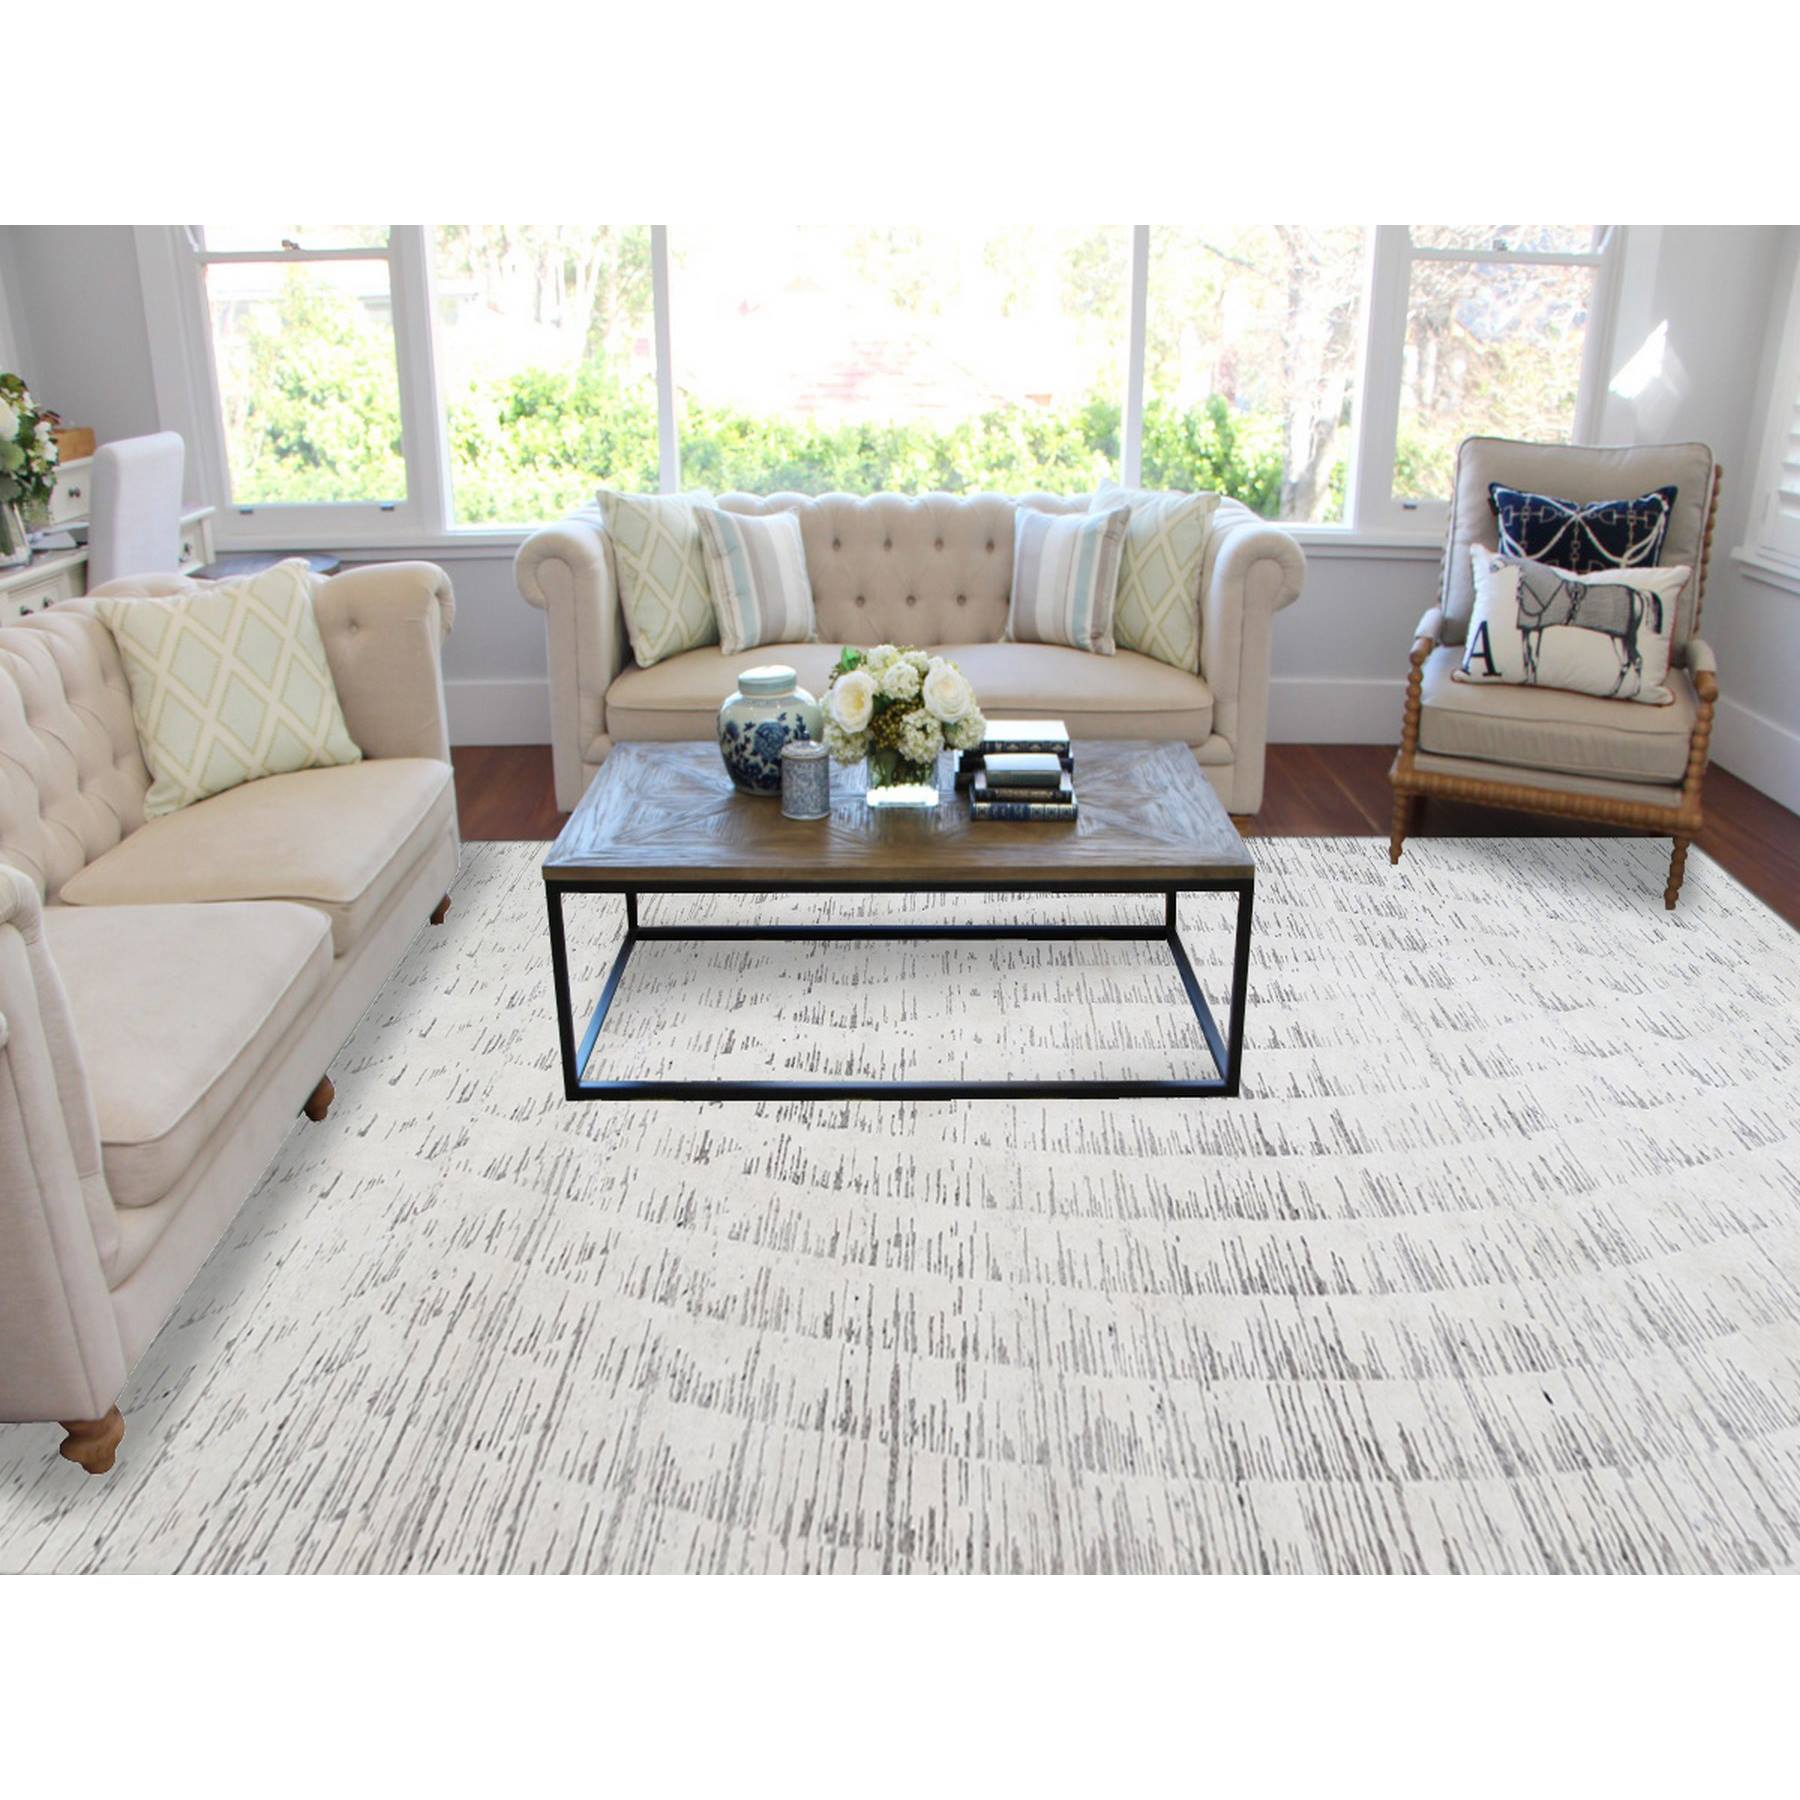 Modern-and-Contemporary-Hand-Knotted-Rug-316840